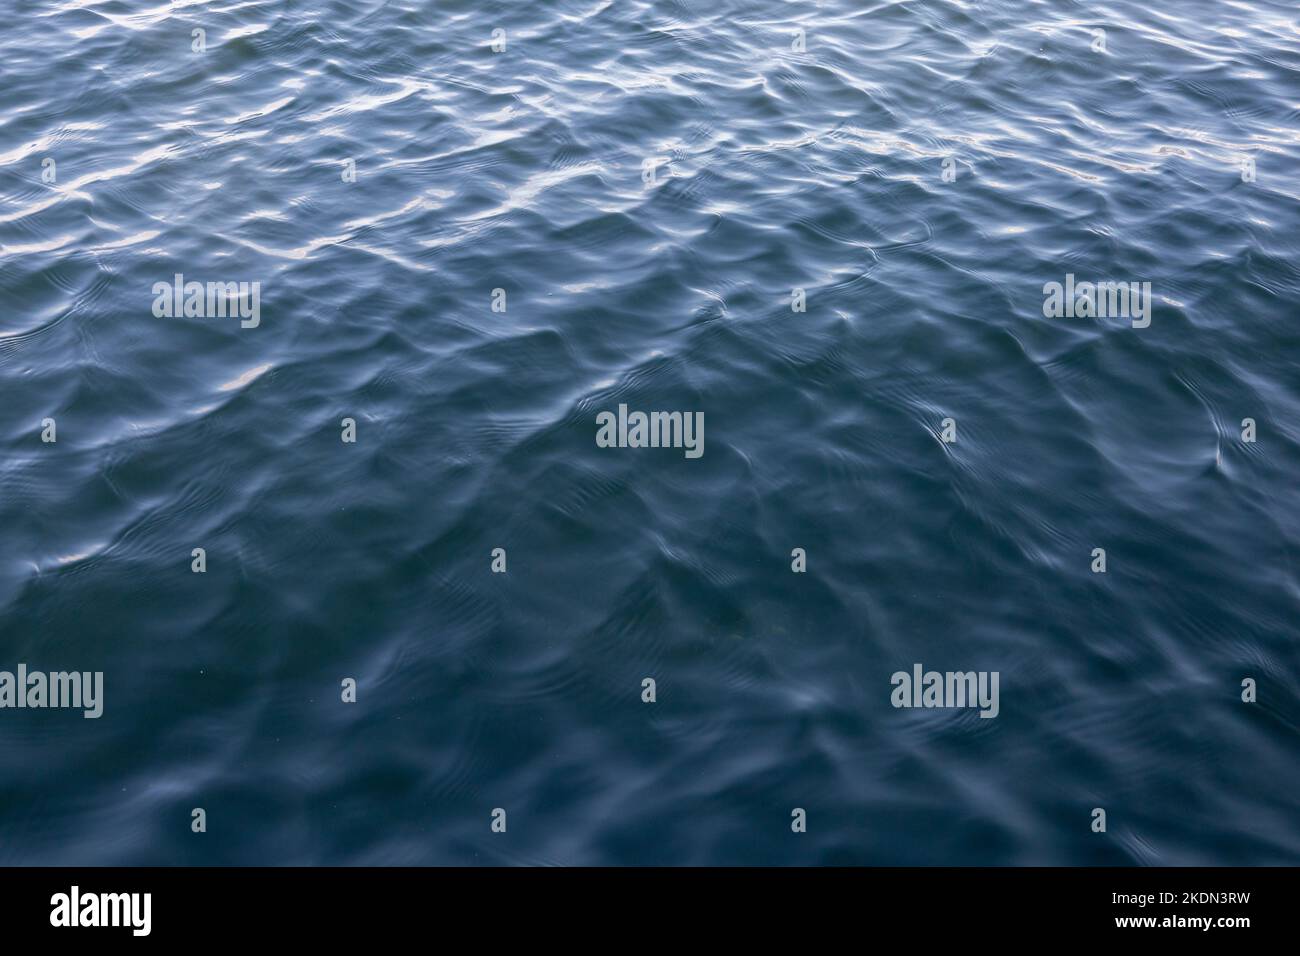 Water waves on the sea. Ripples on sea texture pattern background or wallpaper. Stock Photo